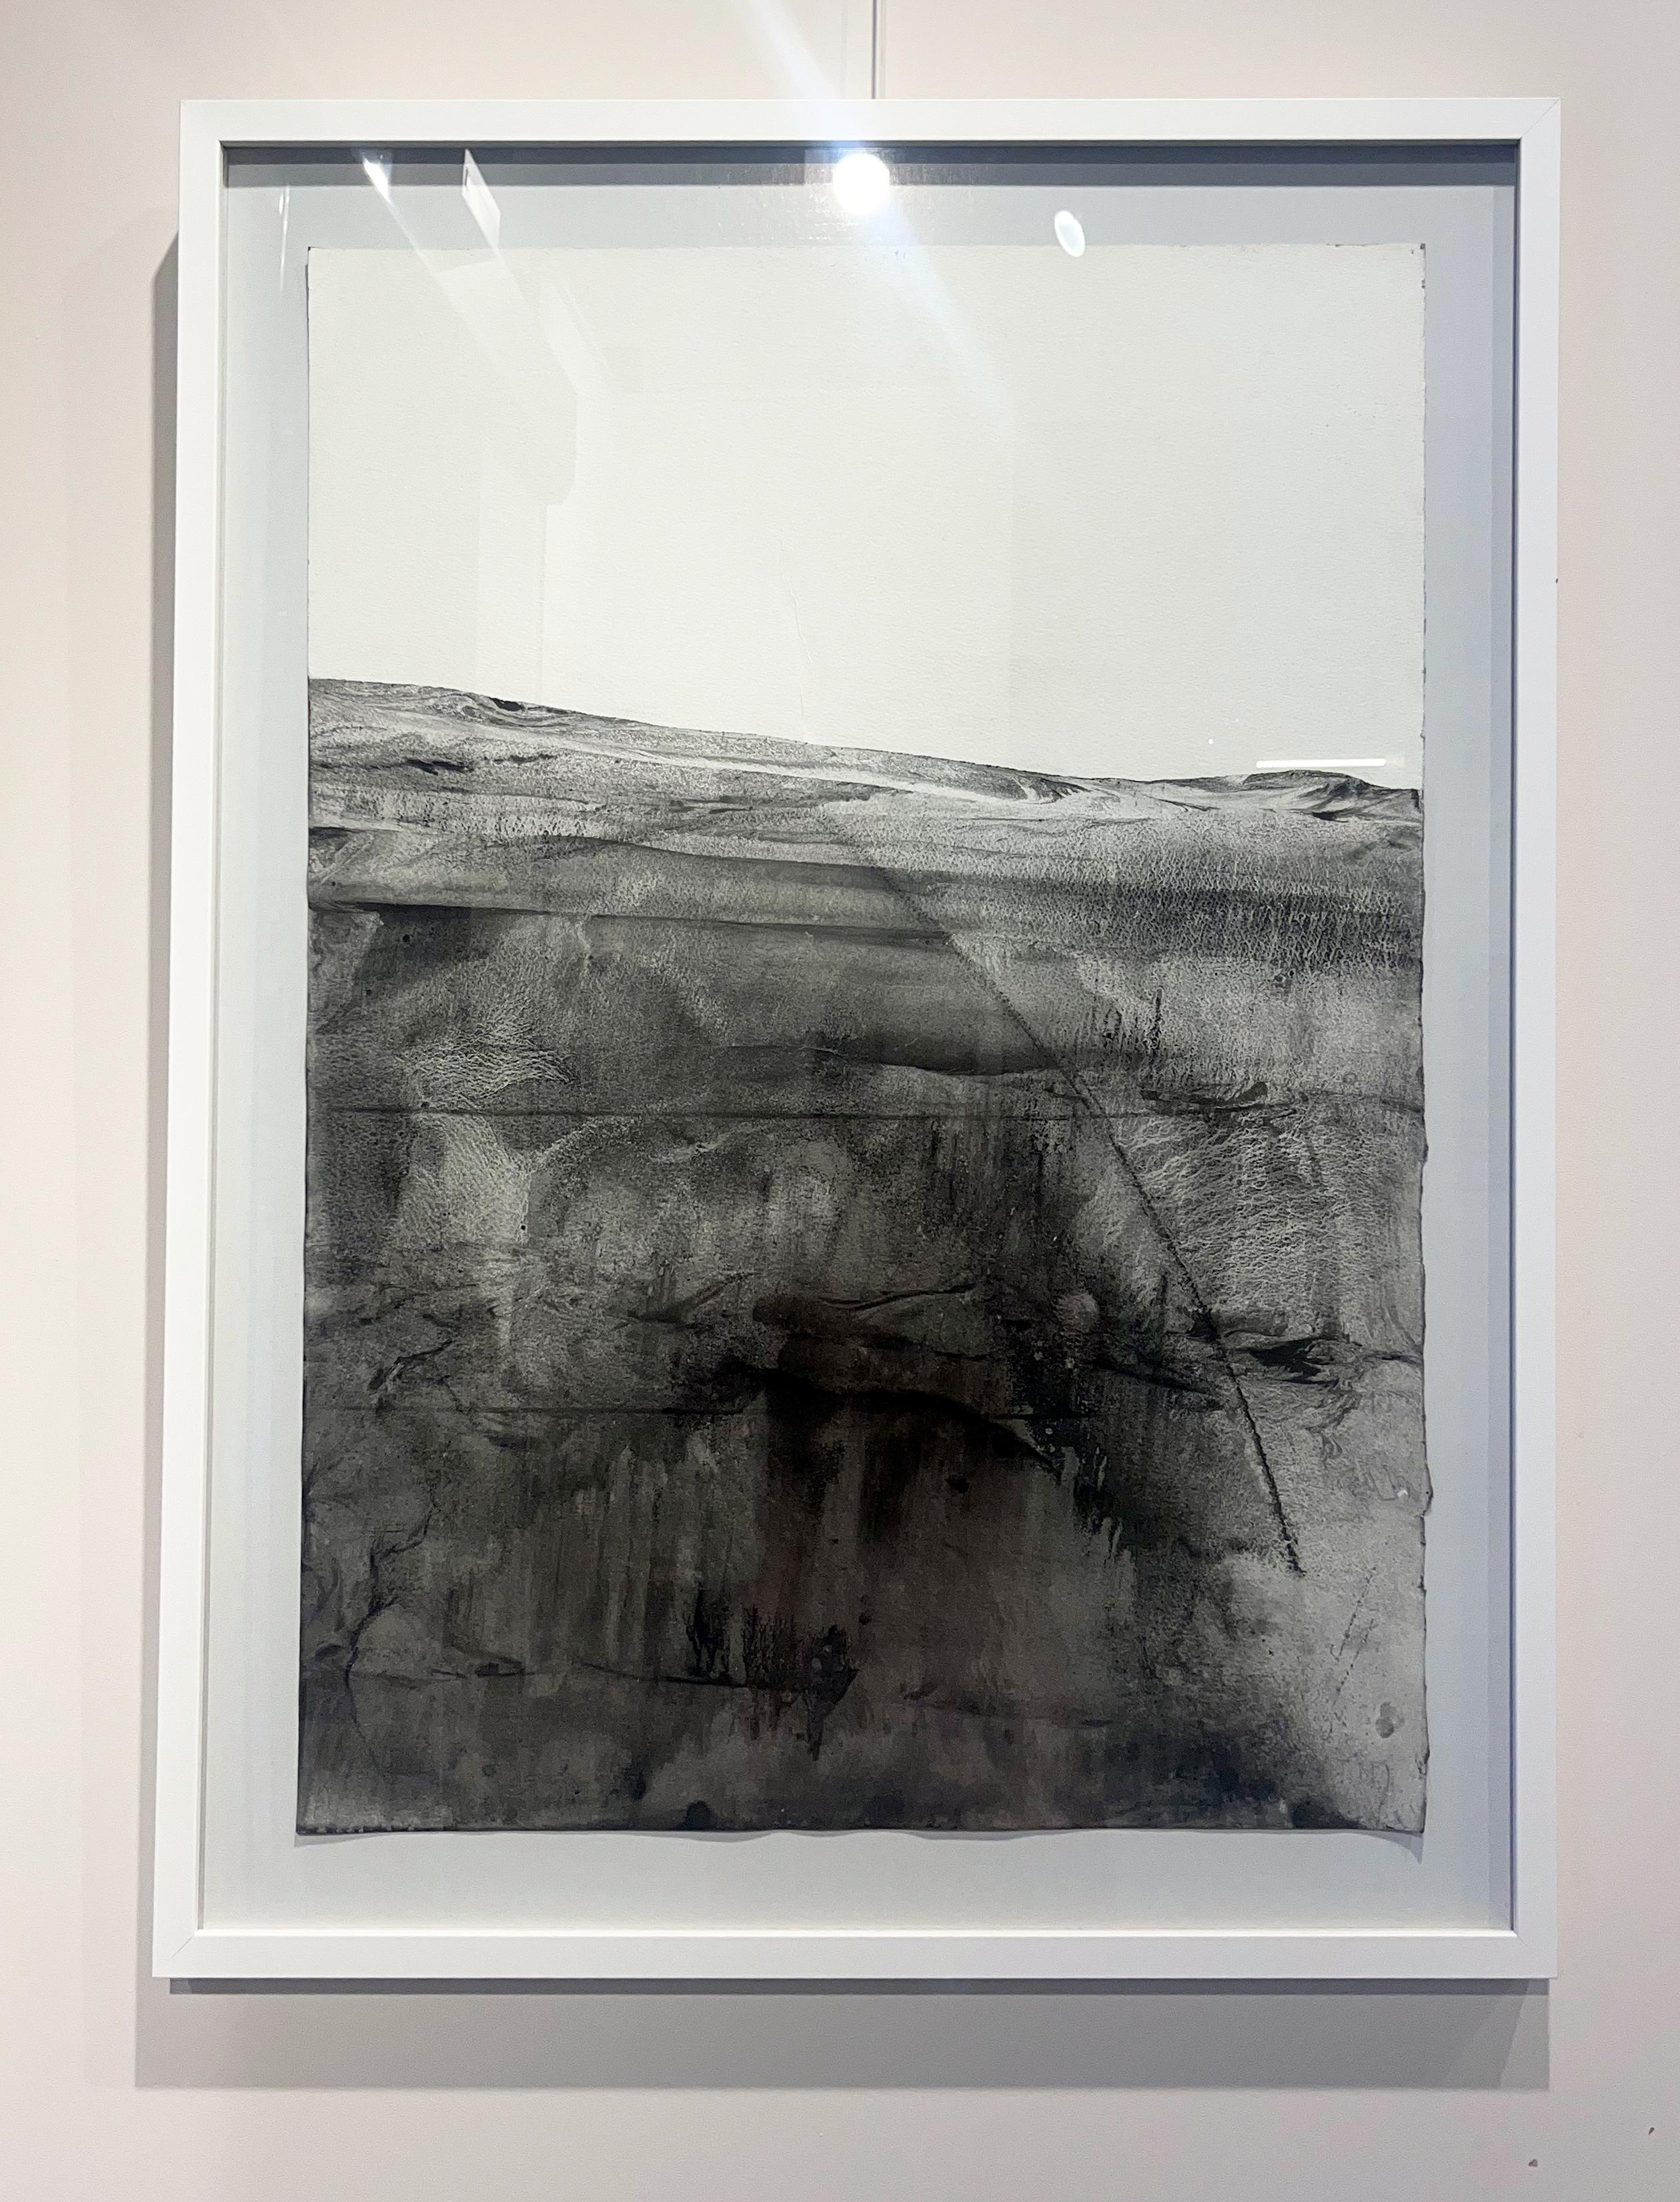 landscape
mineral oxide on papers ( Canson Paper 300gr)
Origial drawing ,one of a kind
55x75 cm
frame option as in photo

2022

Marilina Marchica, born in Agrigento, where she works and lives, has a degree in painting

at the Academy of Fine Arts in